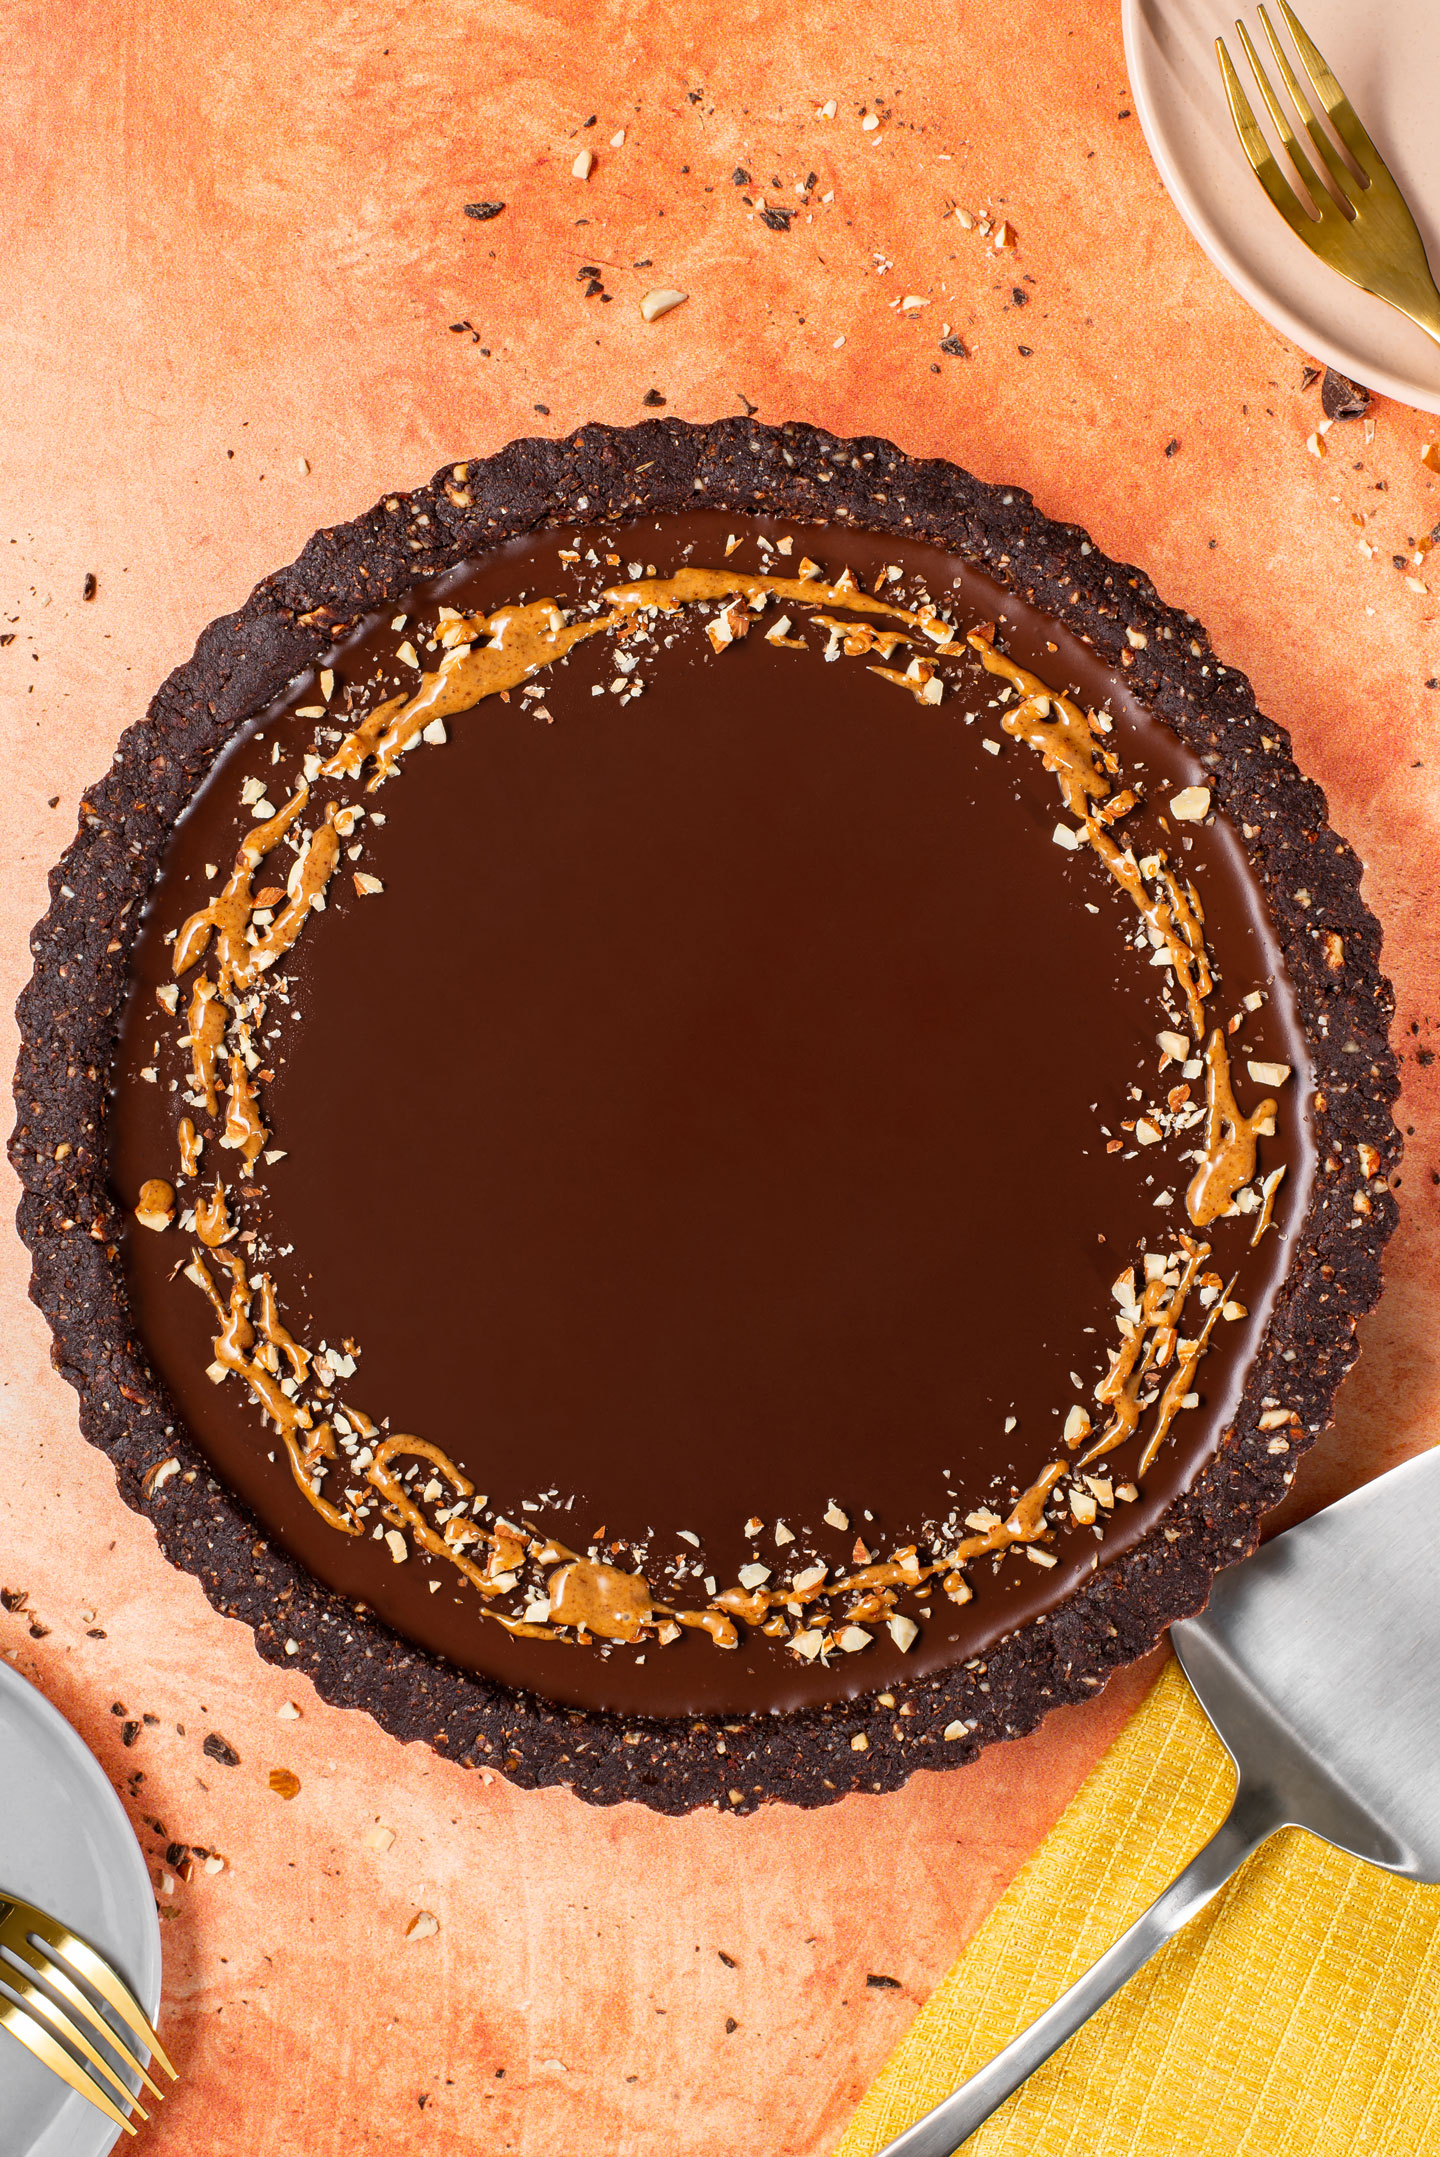 Top down view of a vegan chocolate tart. The dark chocolate tart is delicately decorated with crushed toasted almonds and an almond butter drizzle.